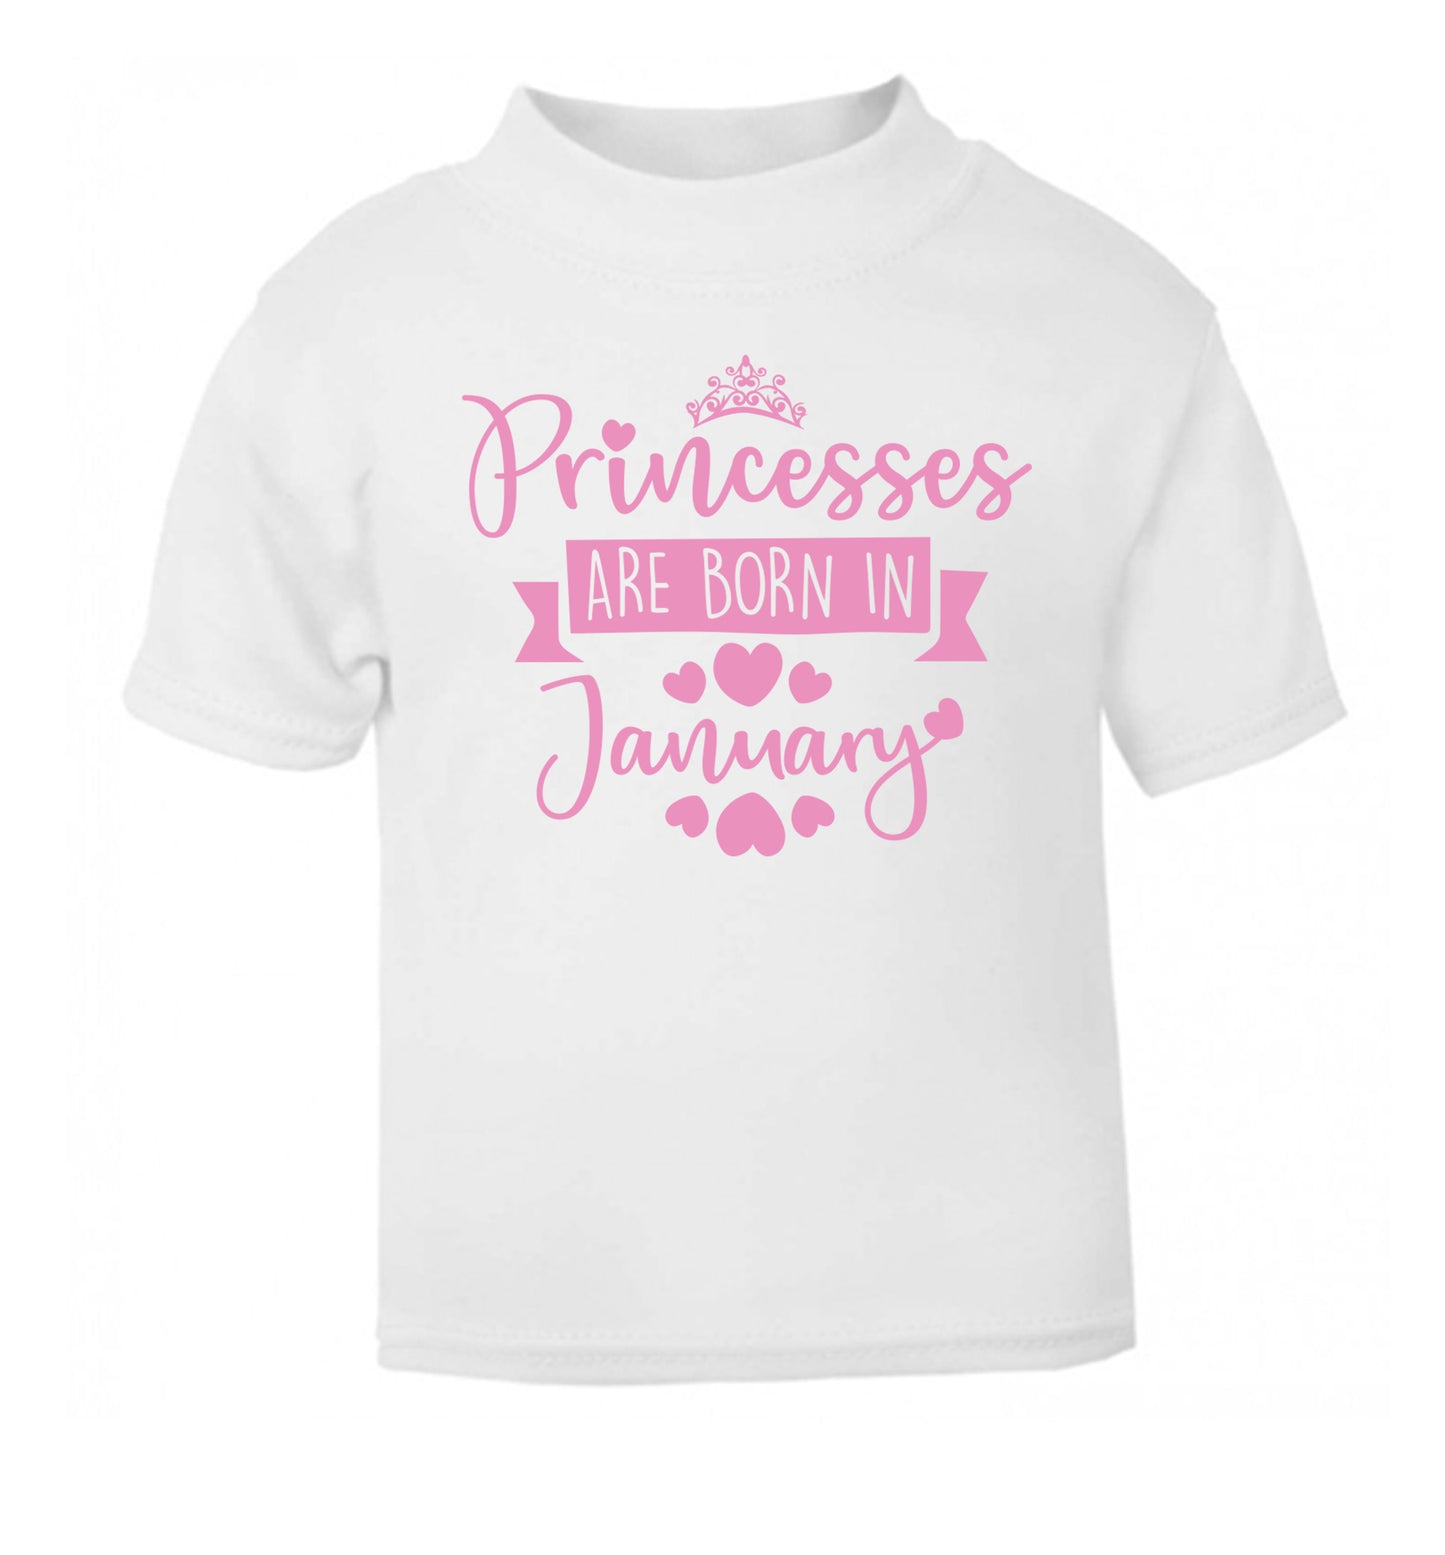 Princesses are born in January white Baby Toddler Tshirt 2 Years